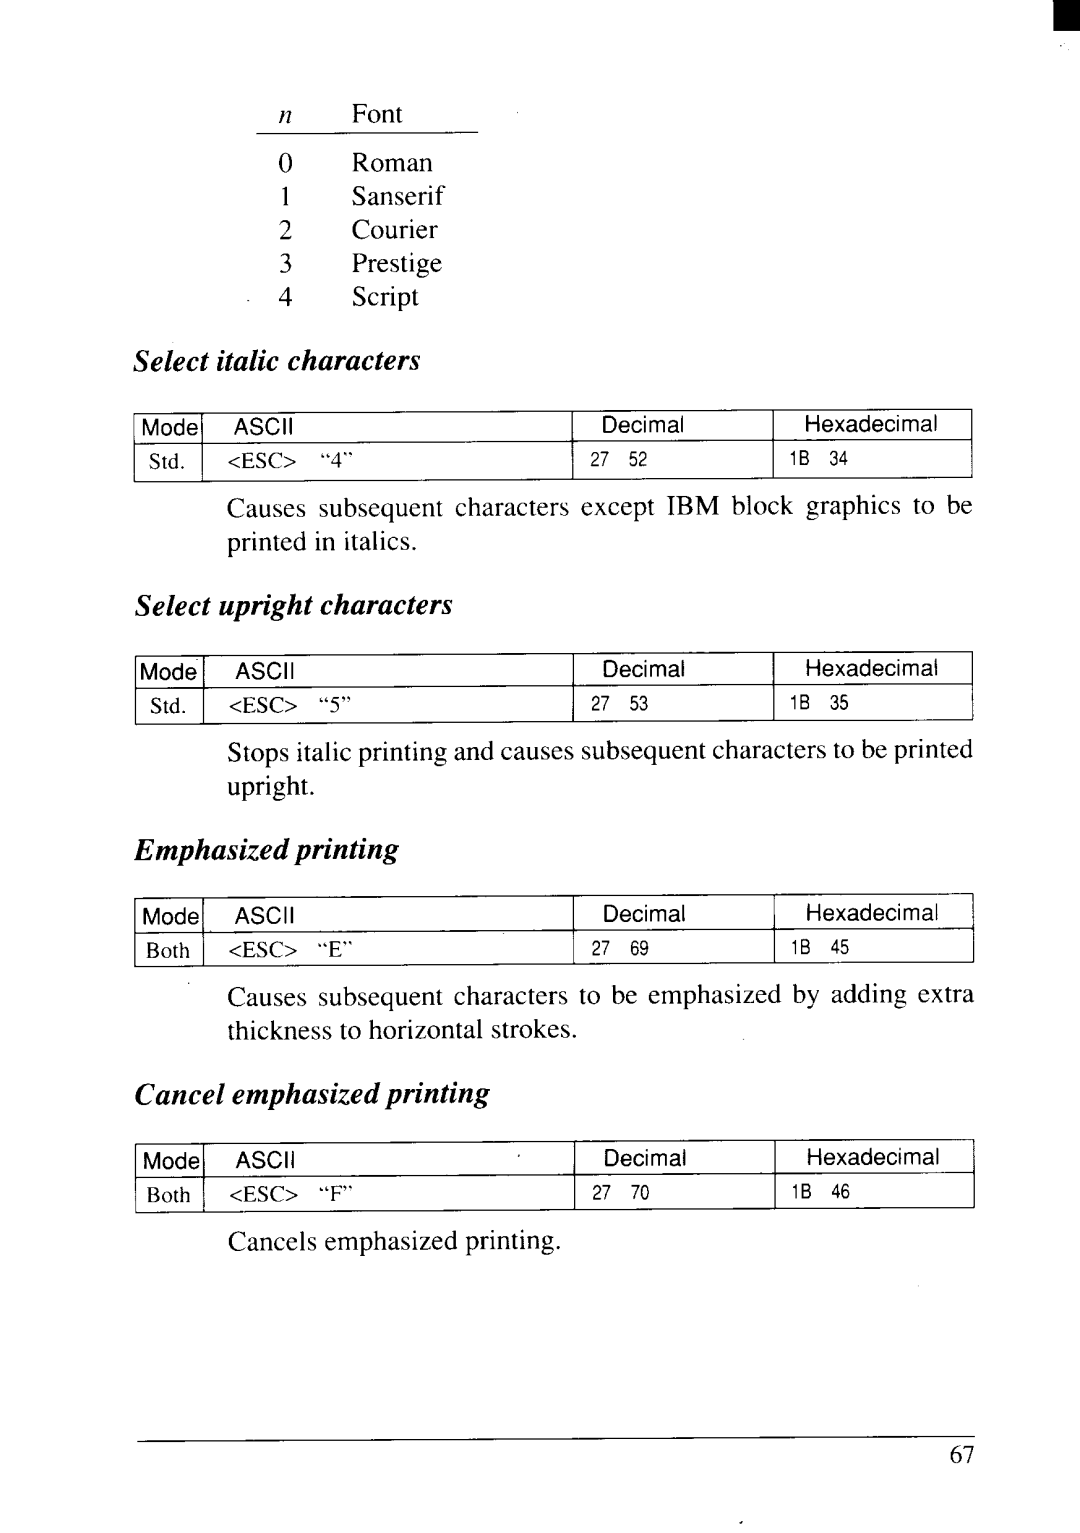 Star Micronics NX-2415II user manual Select italic characters, Select upright characters, Emphasized printing 